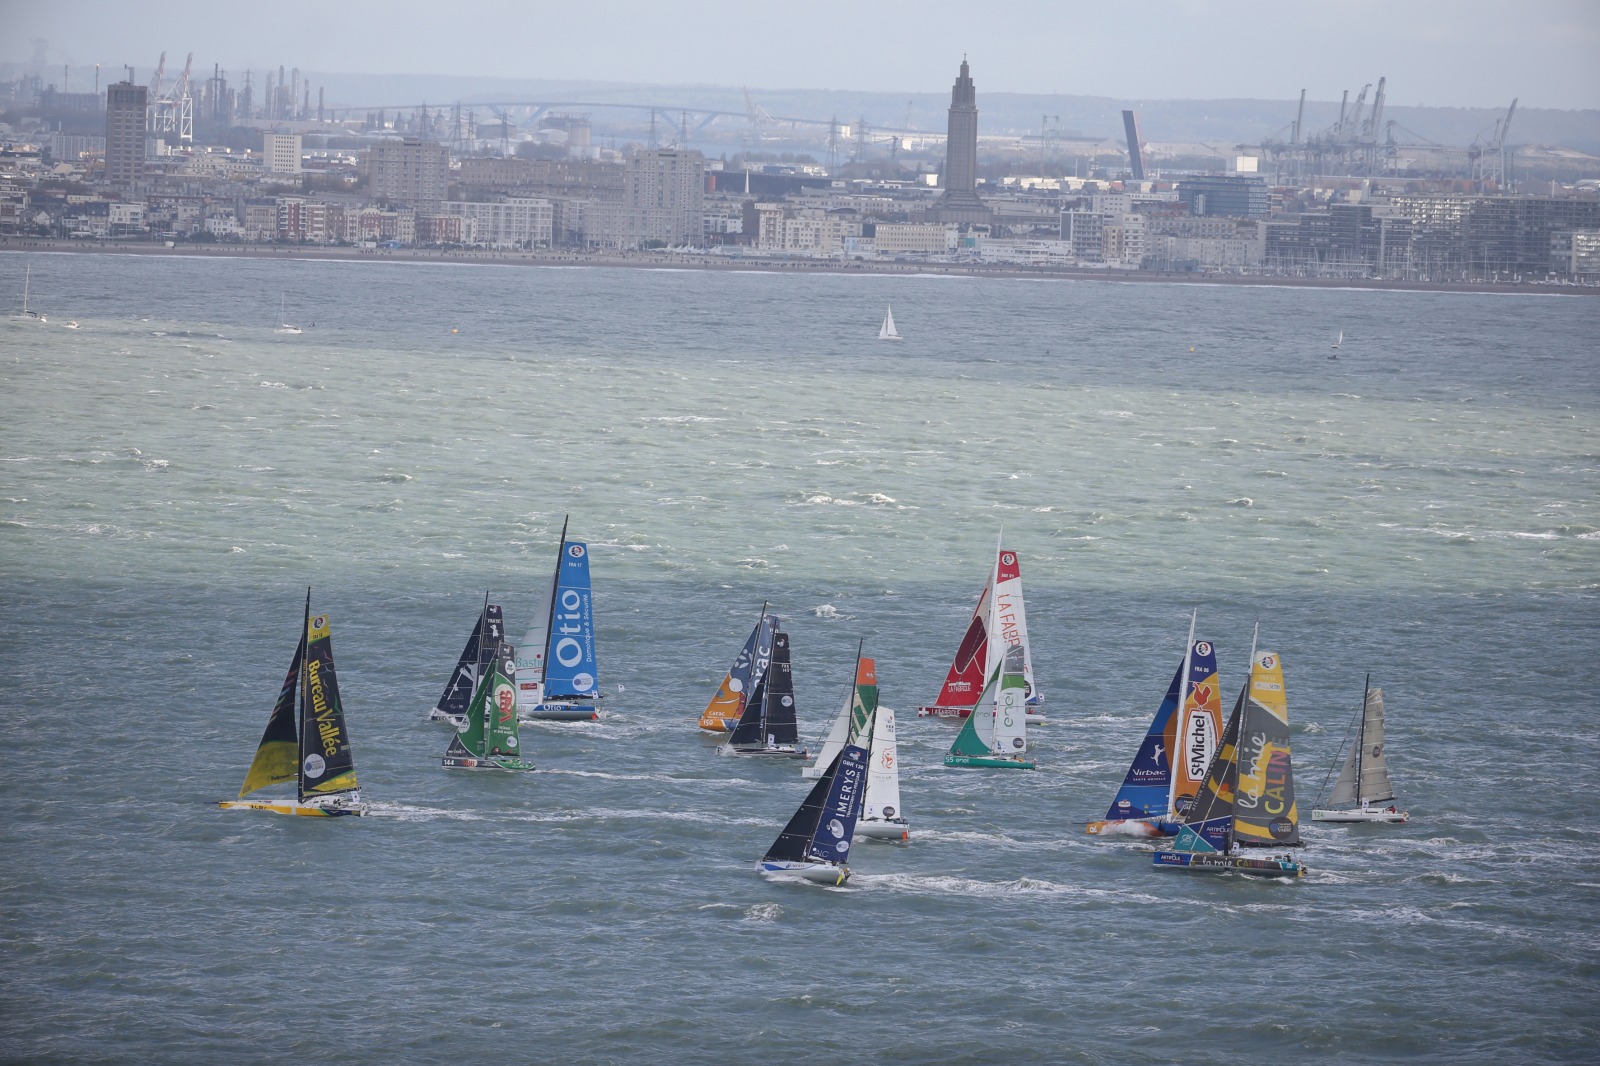  IMOCA Open 60, Class 40, Multi 50, Ultime  Transat Jacques Vabre  Le Havre FRA  Day 1